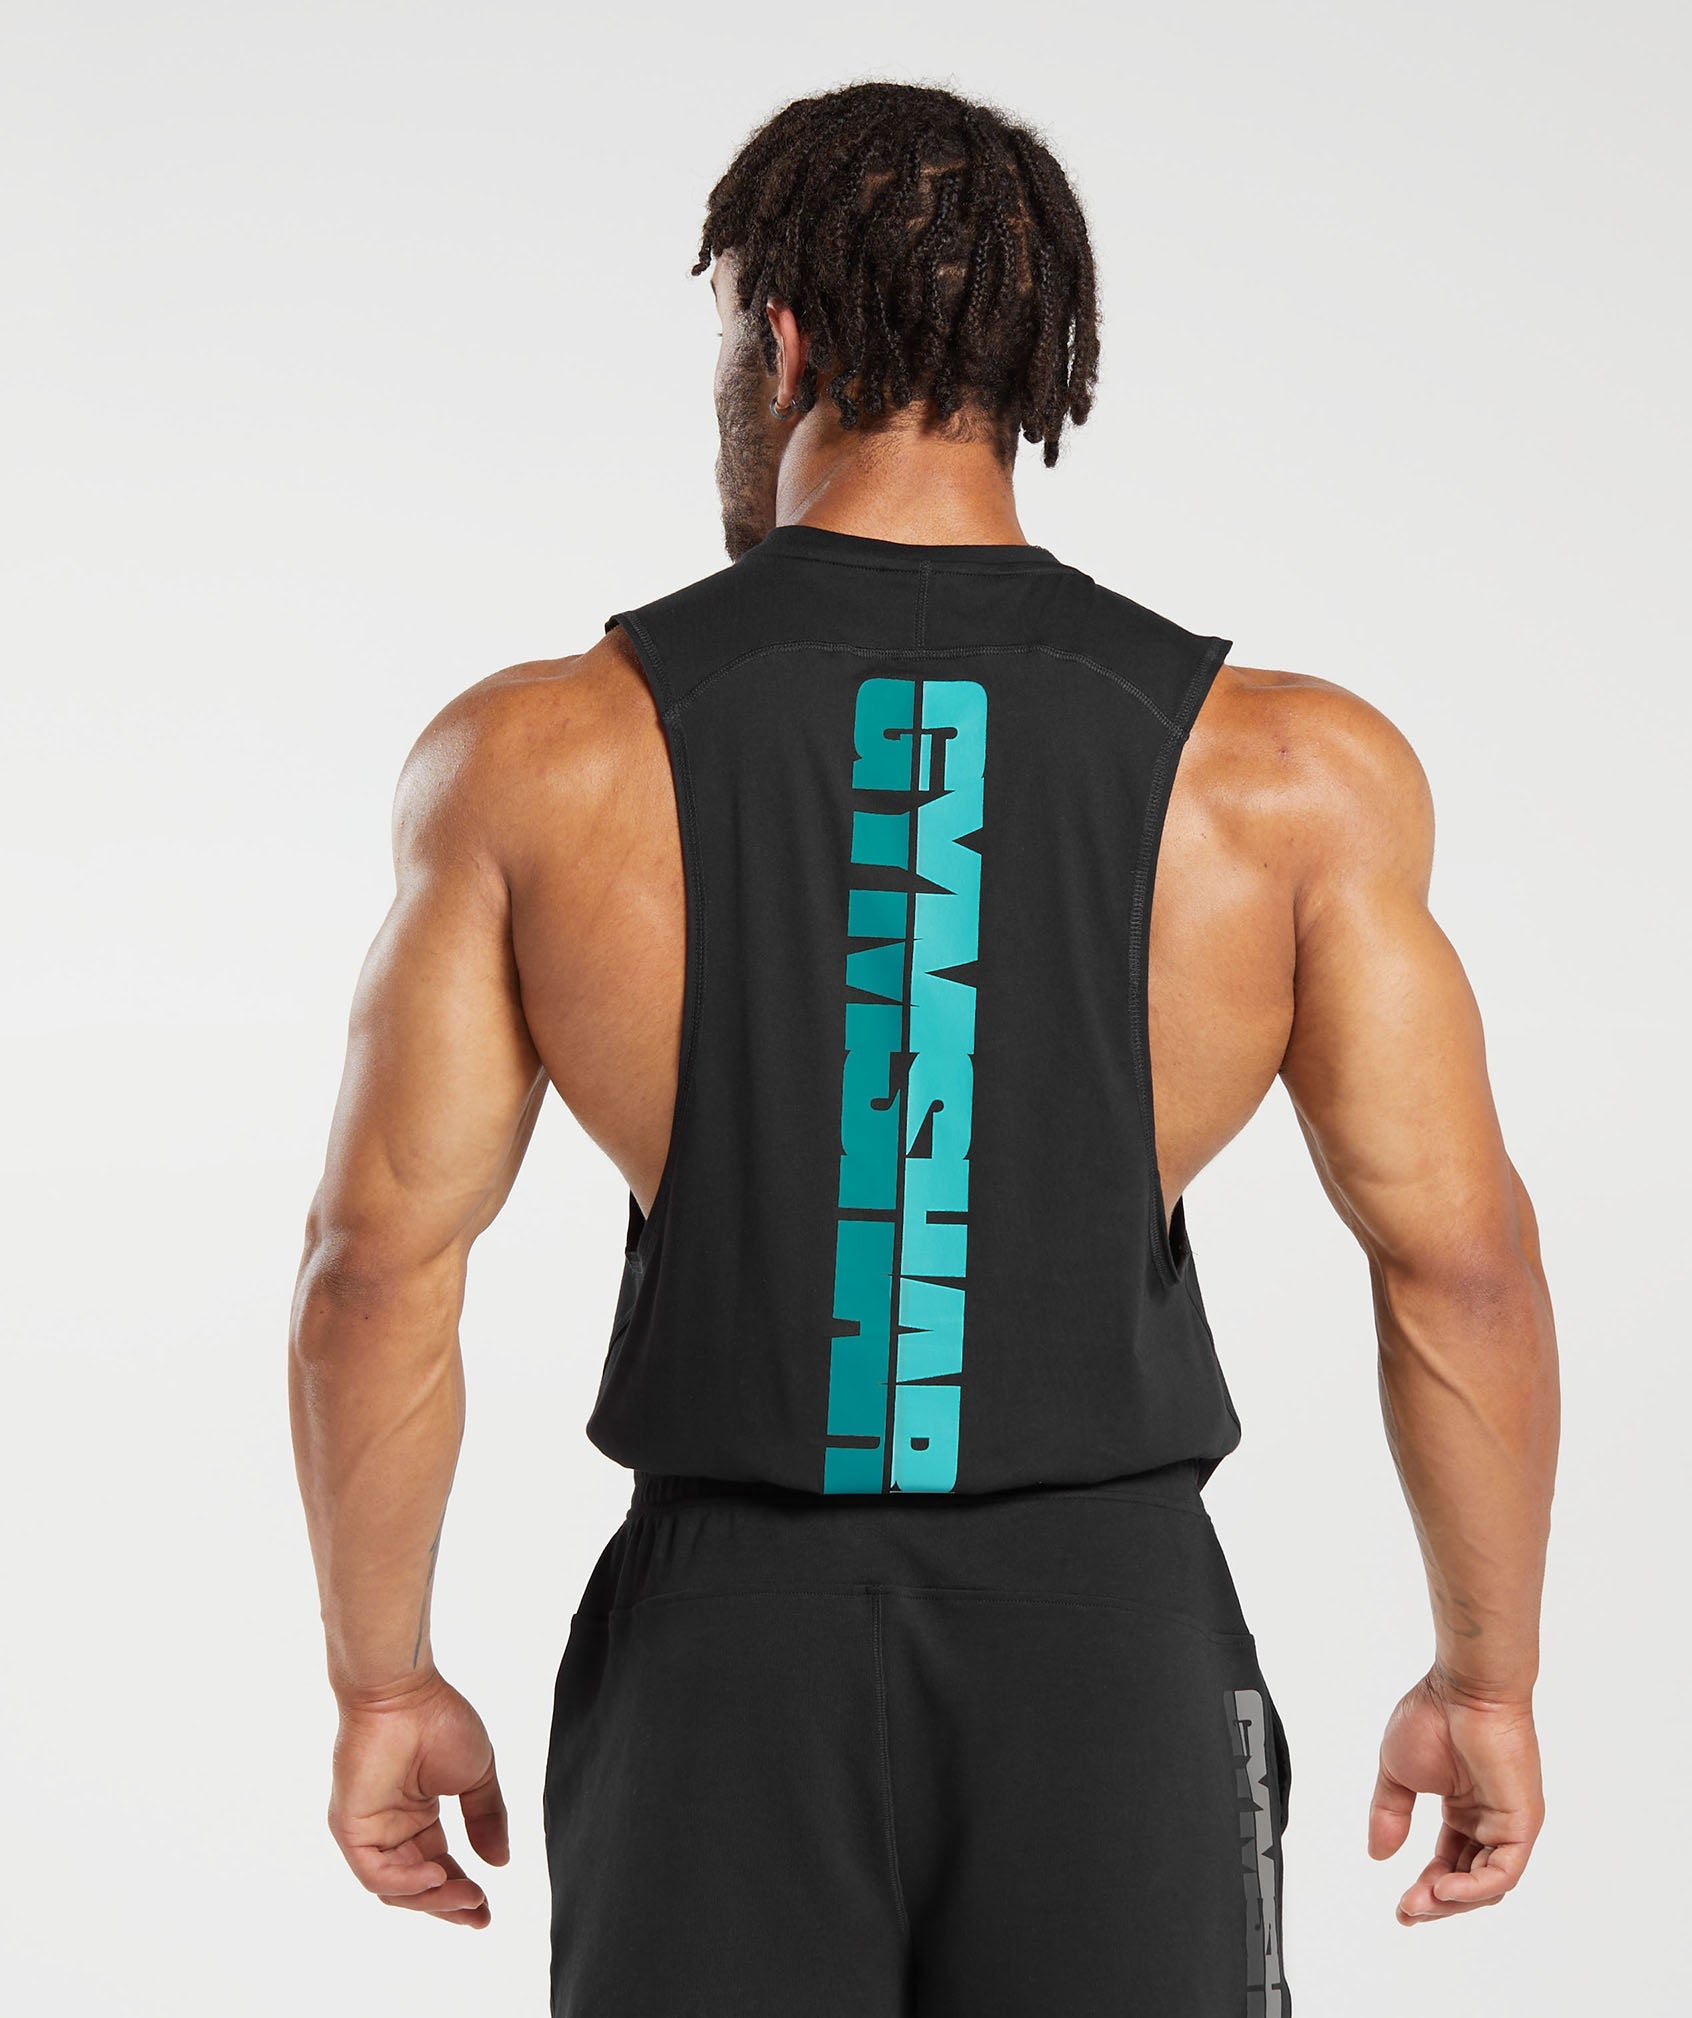 Gifts for Gym Lovers - Gift ideas for Men's - Gymshark